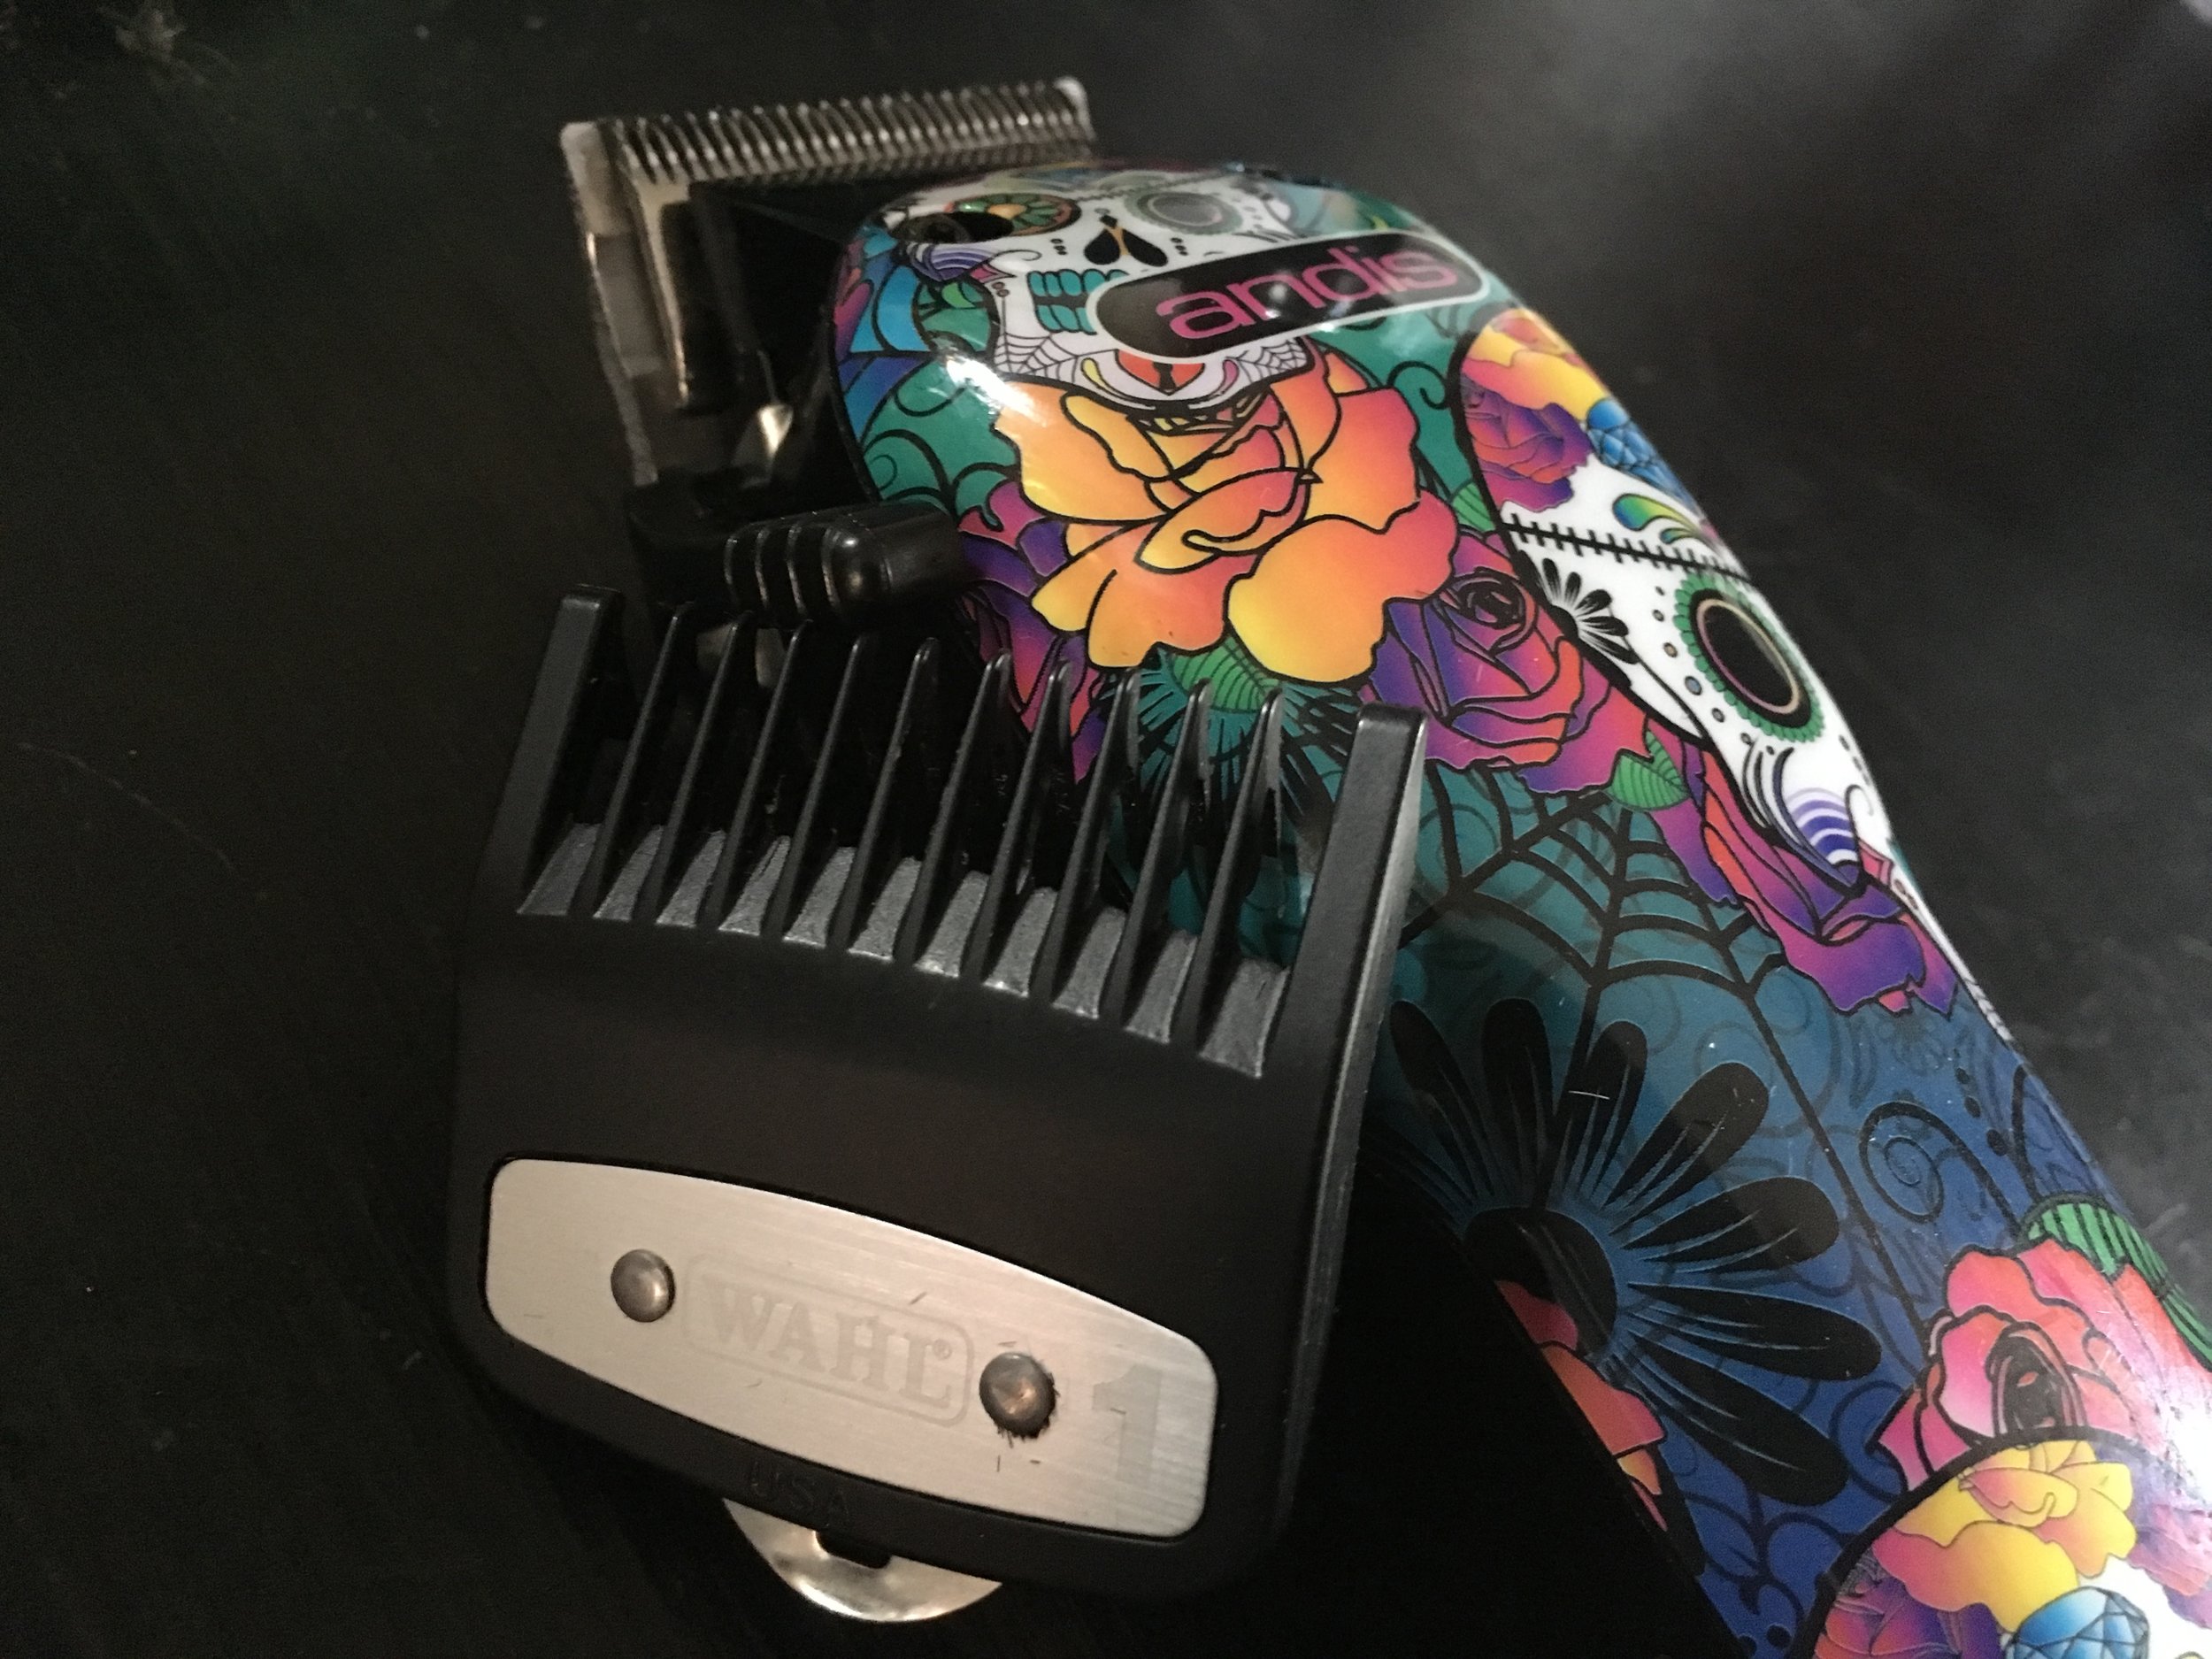 andis pro cordless clippers